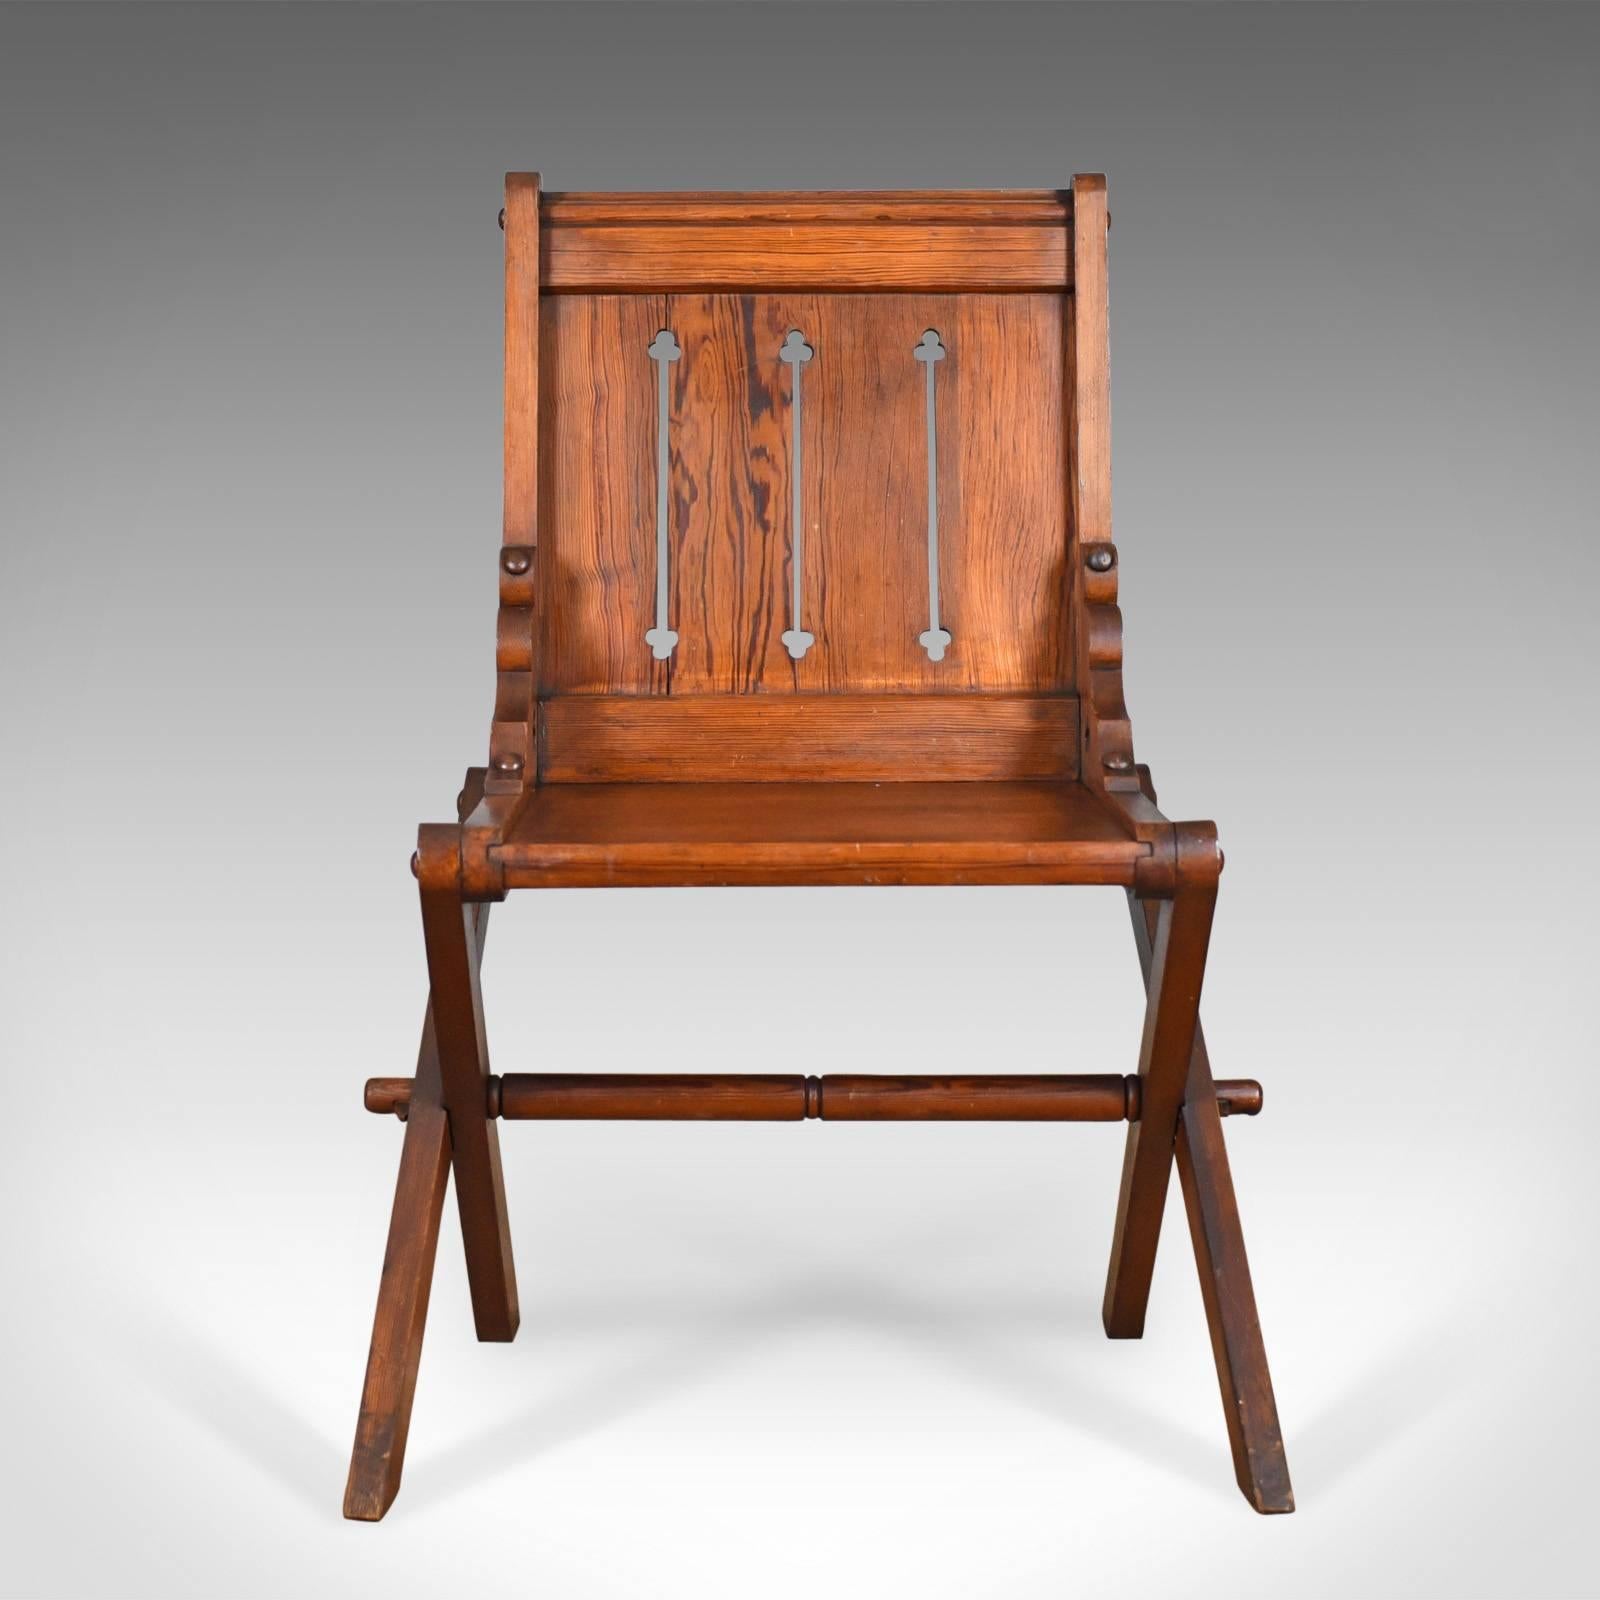 This is an antique Glastonbury chair, English Tudor Revival carved hall seat dating to the late 19th century, circa 1880.

An unusual, arm-less Glastonbury chair in pitch pine
Exhibiting ecclesiastical and gothic overtones
Classic tusked joints